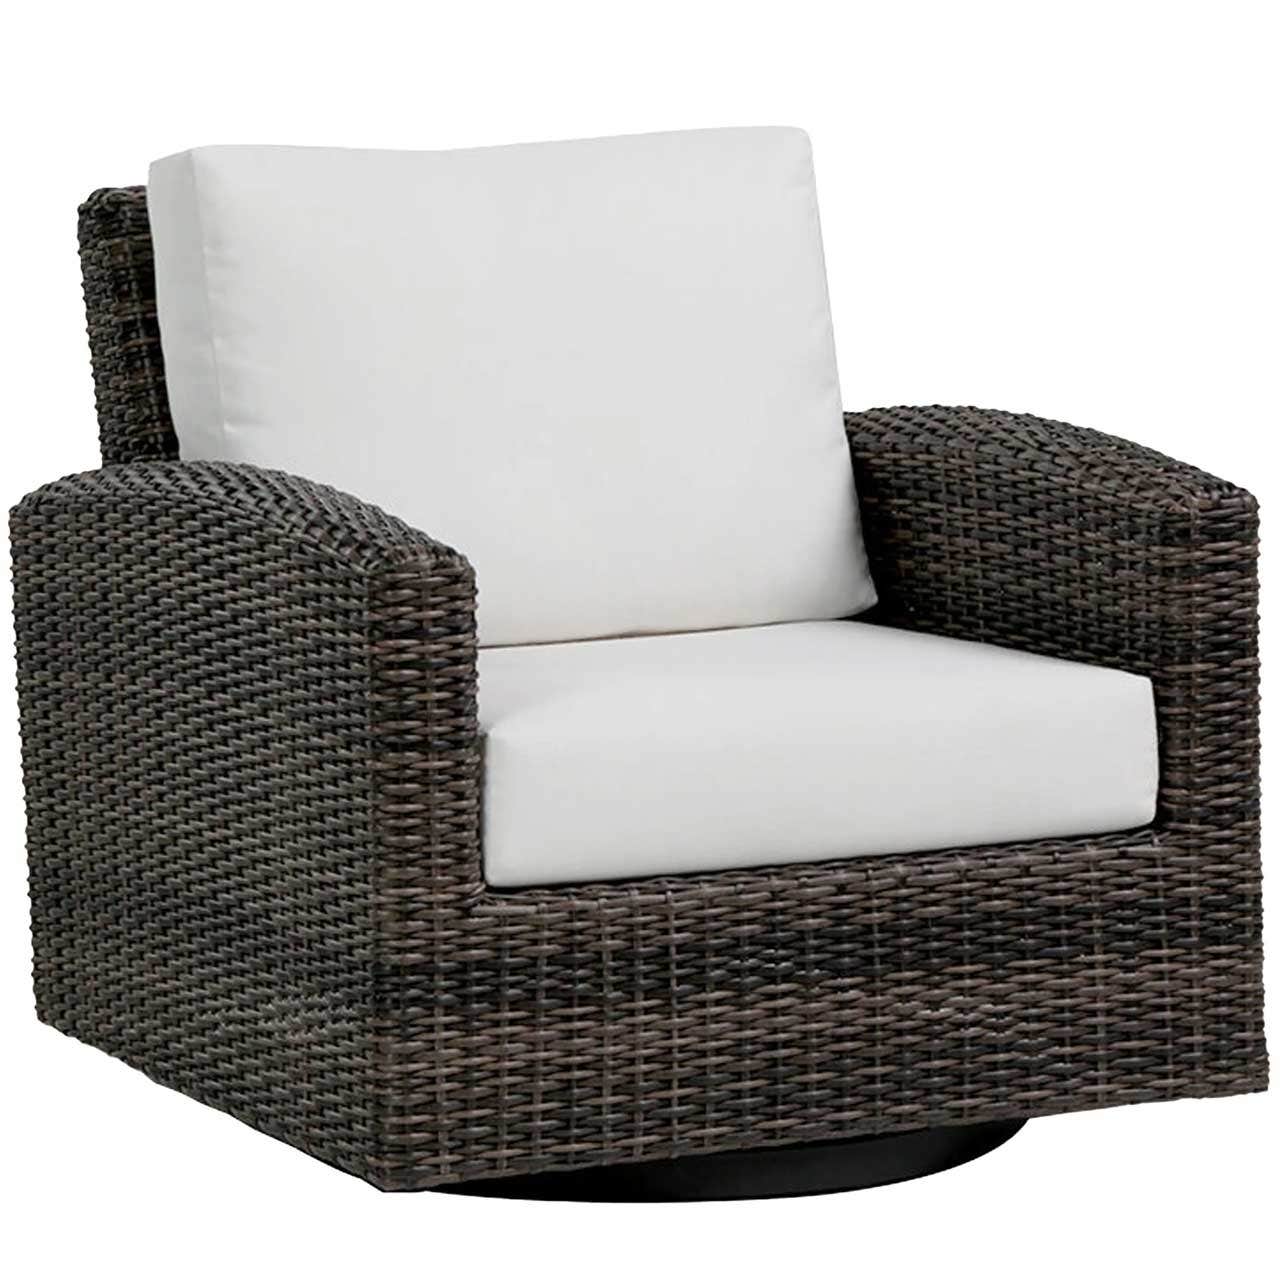 Ratana Coral Gables Swivel Gliding Club Chair with Switch Flax Cushions 12038940